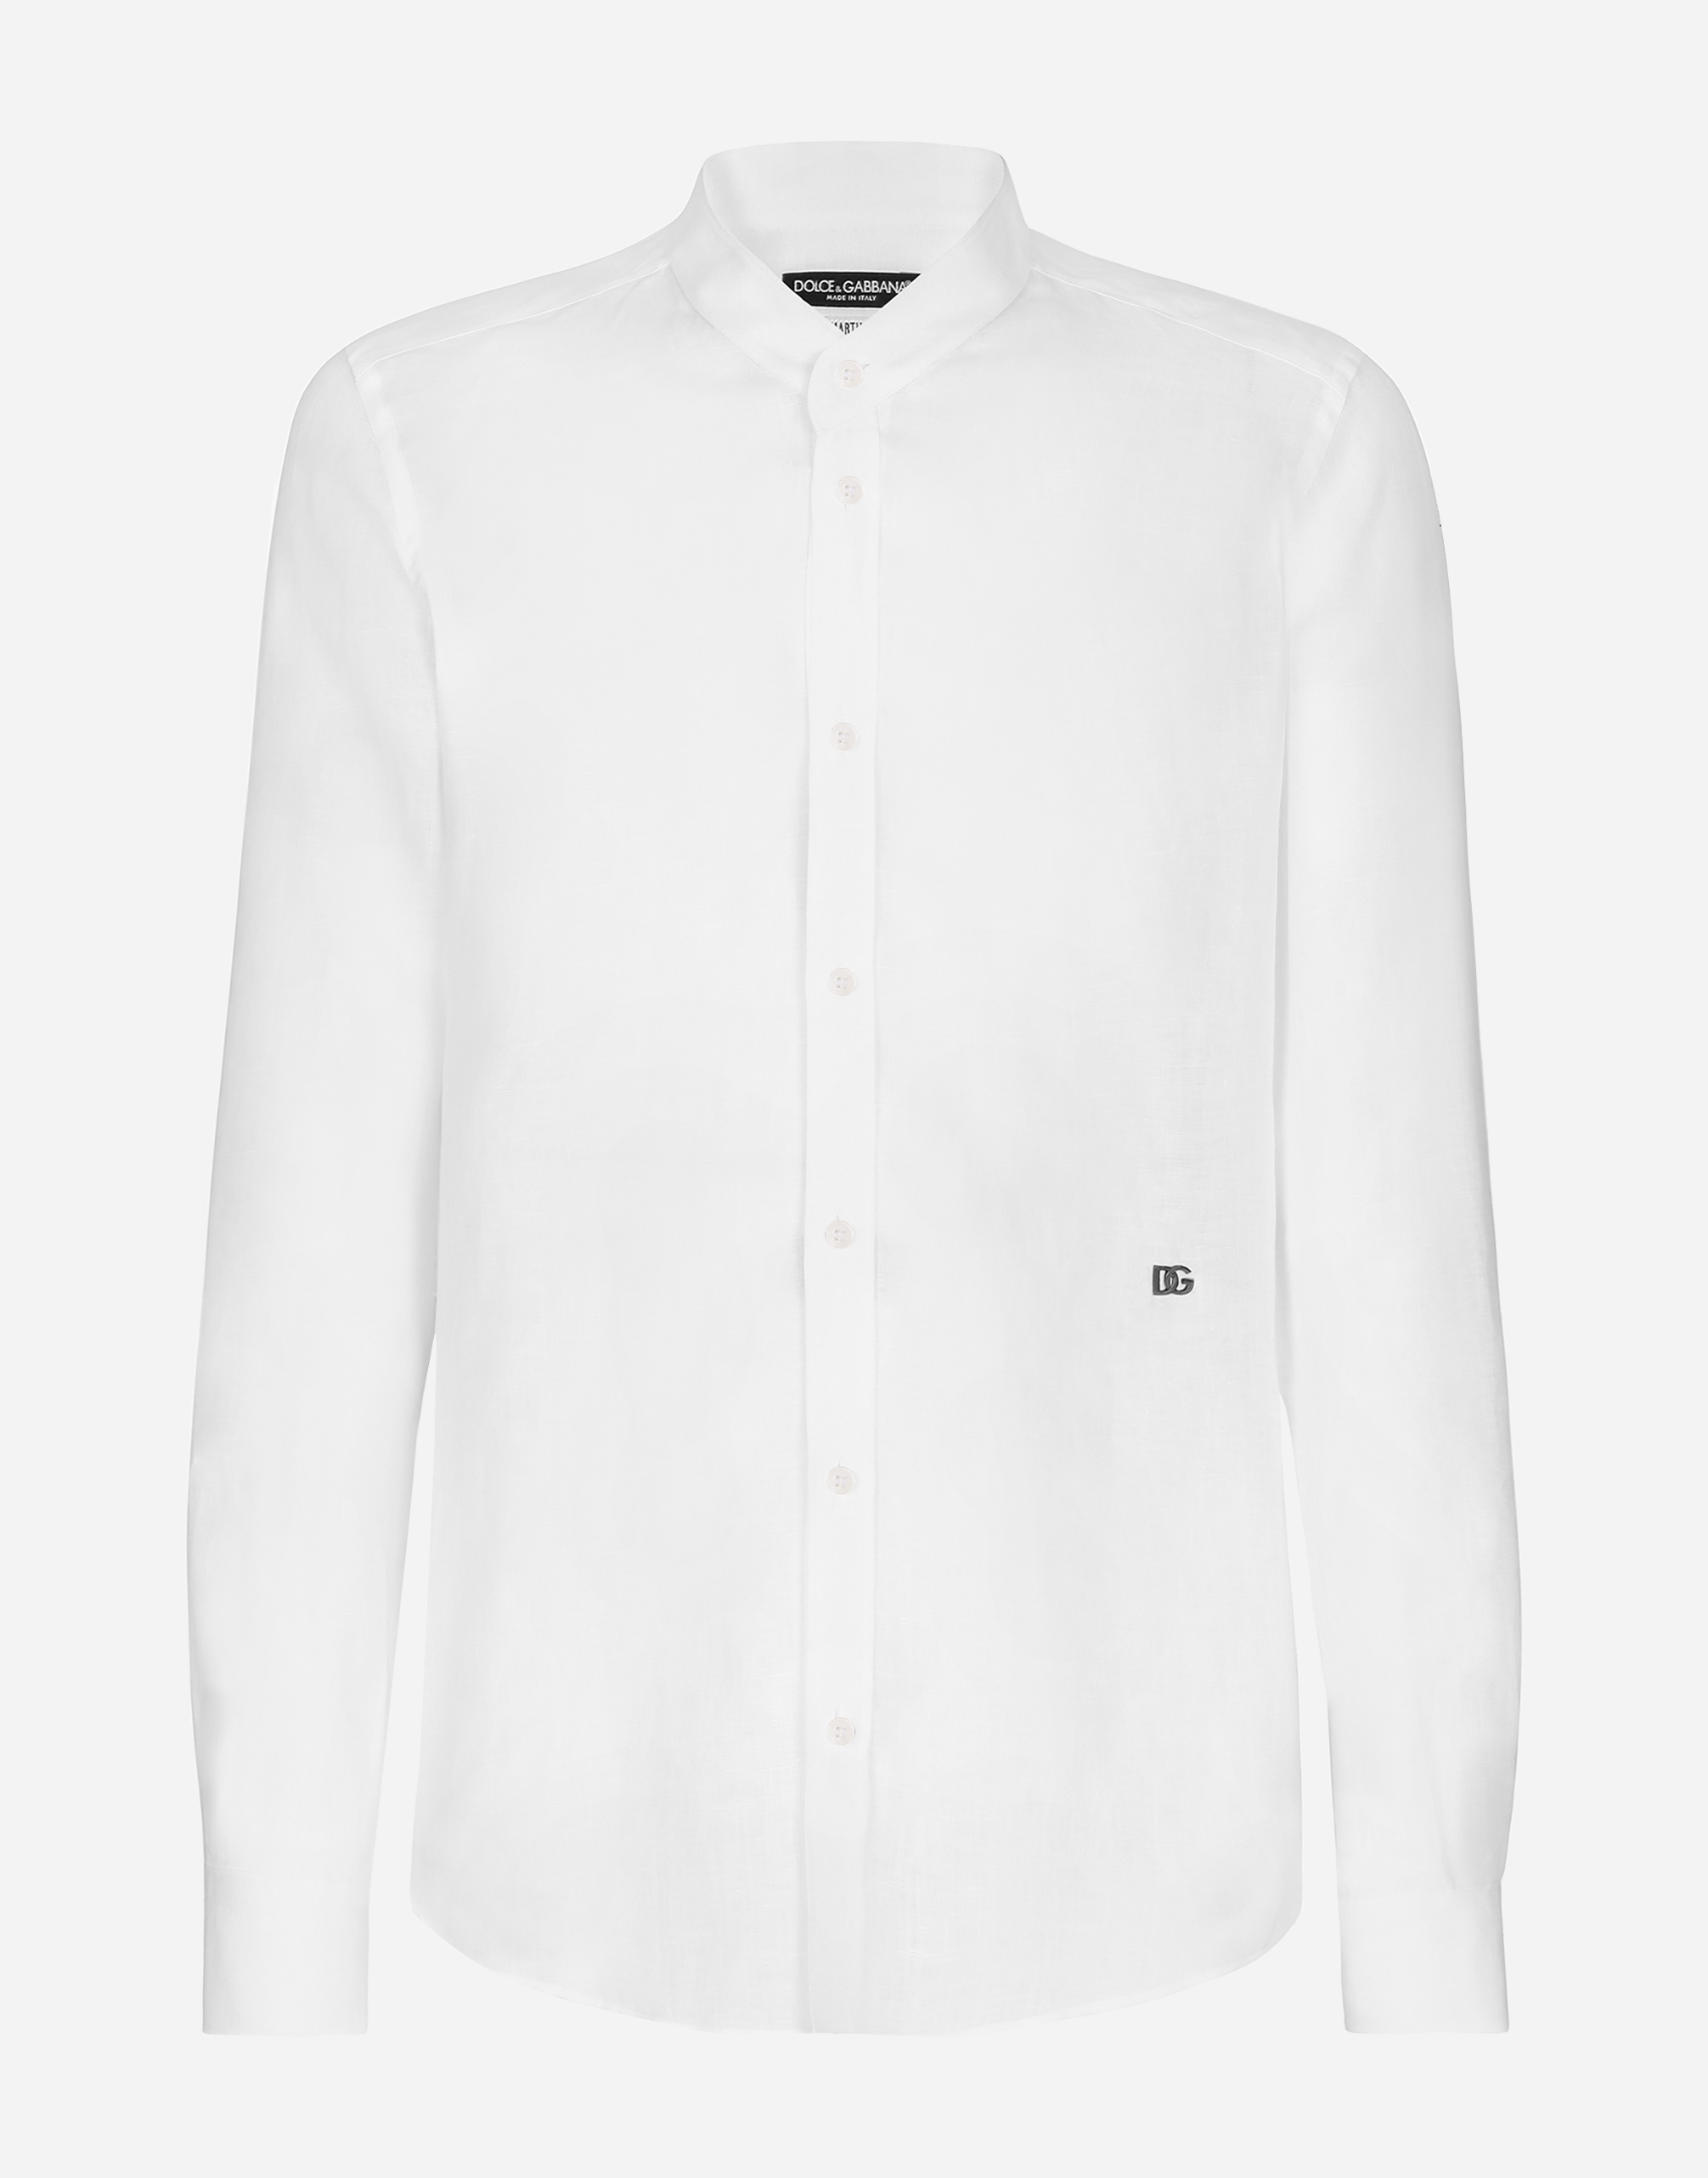 Dolce & Gabbana Linen Martini-fit Shirt With Dg Hardware In White